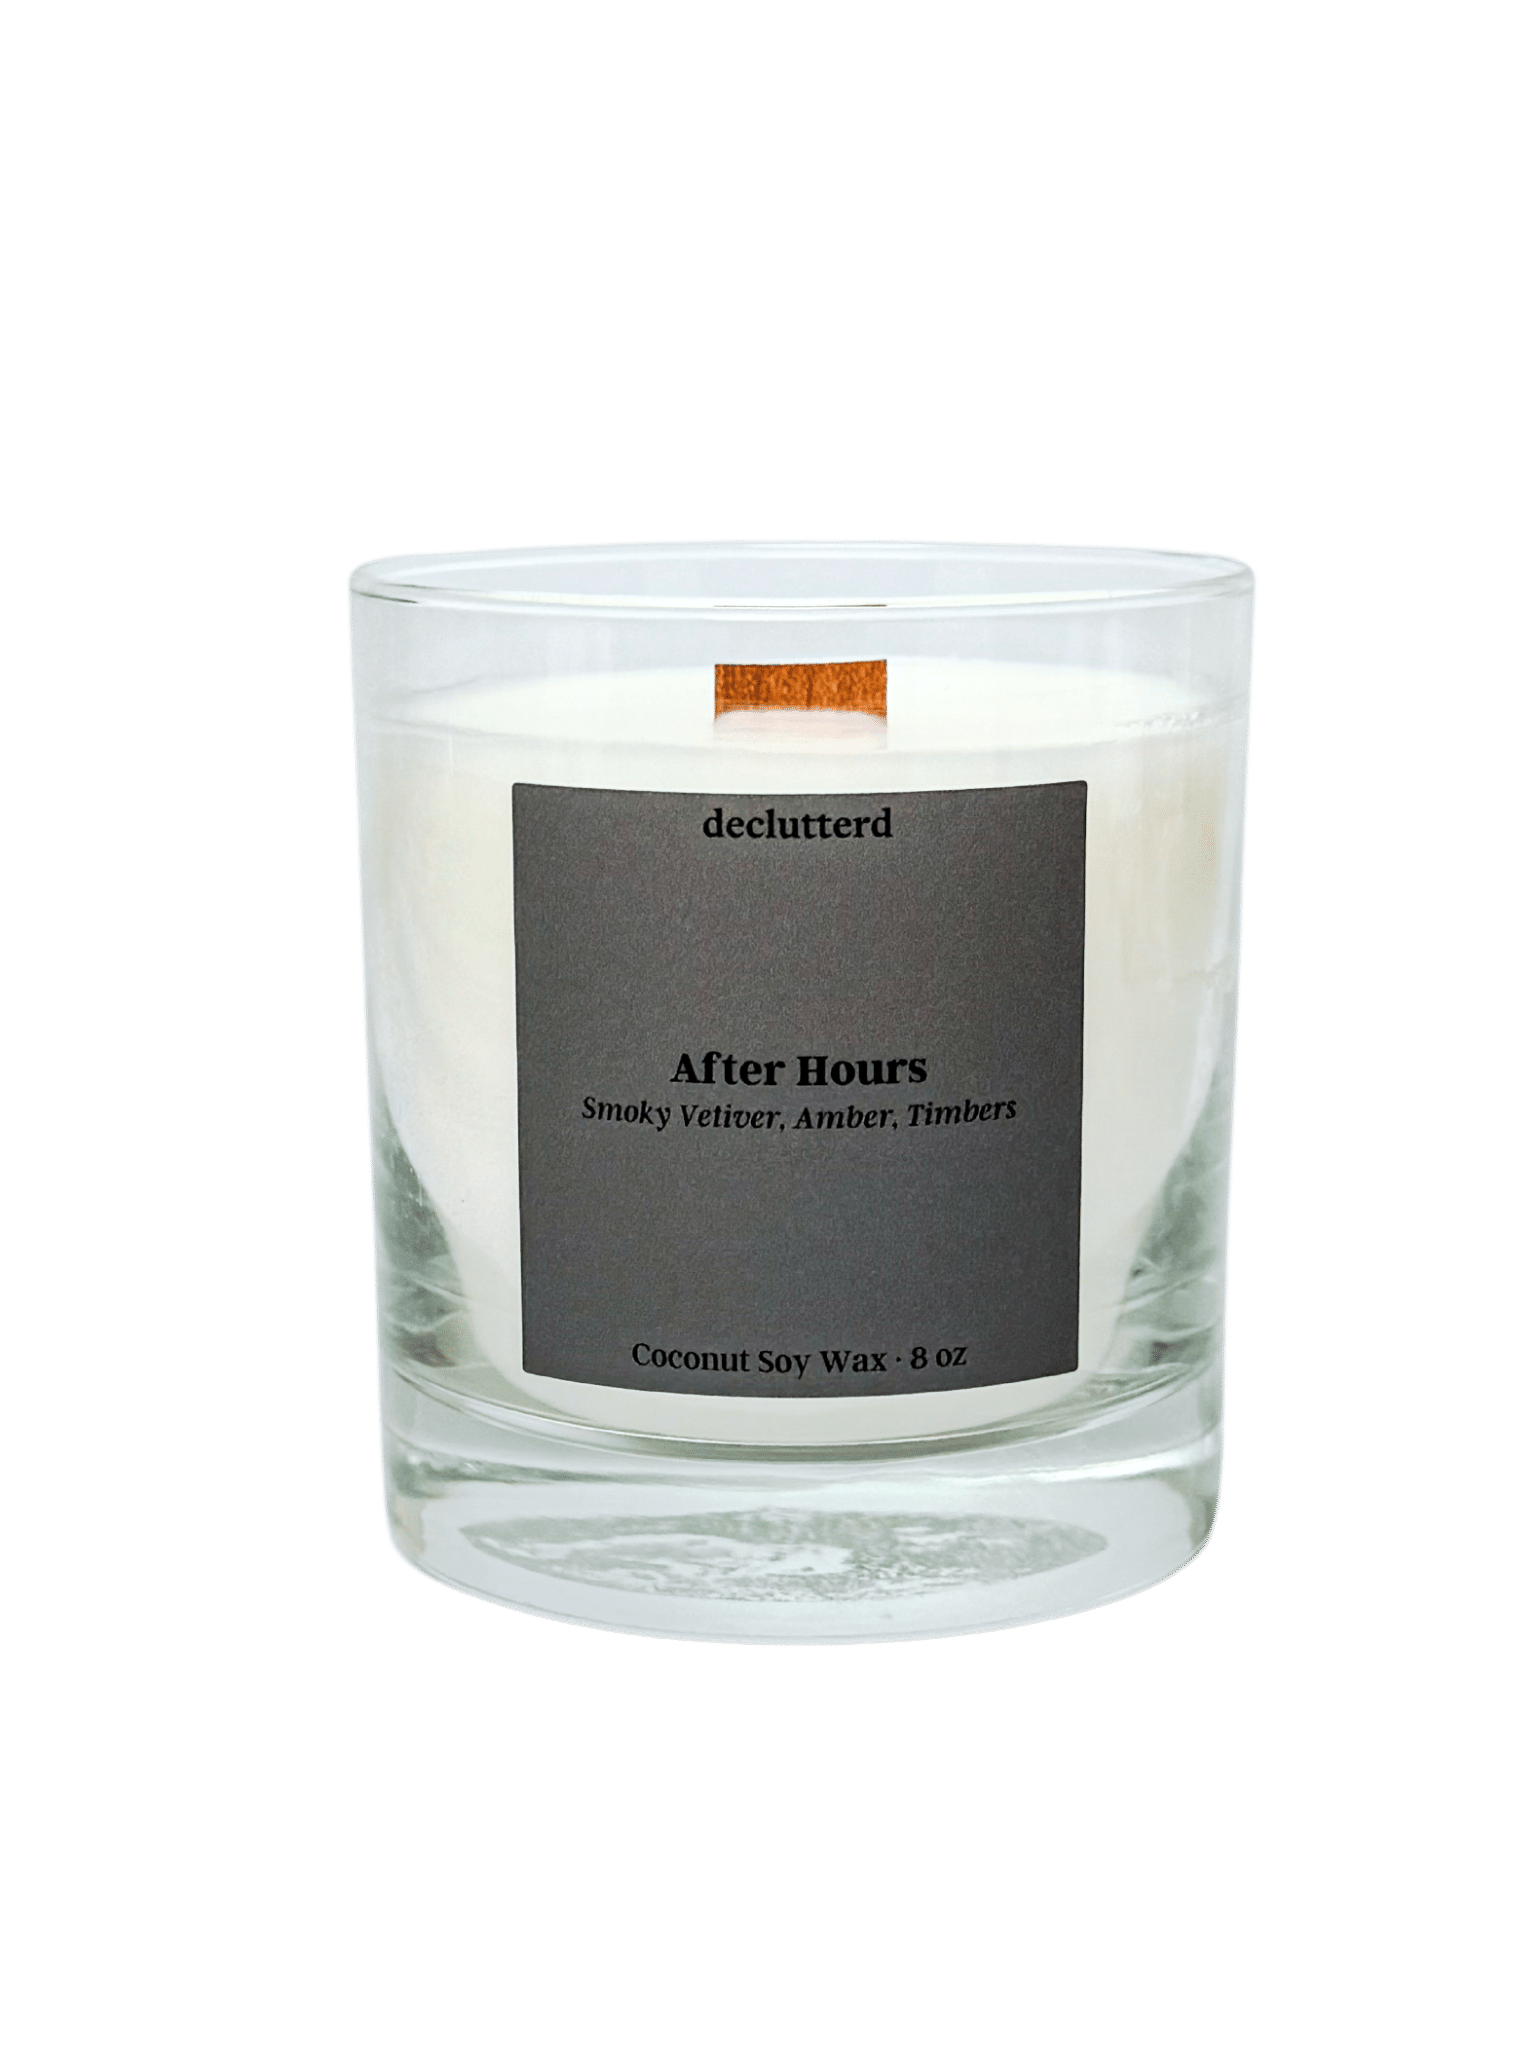 After Hours Wood Wick Candle